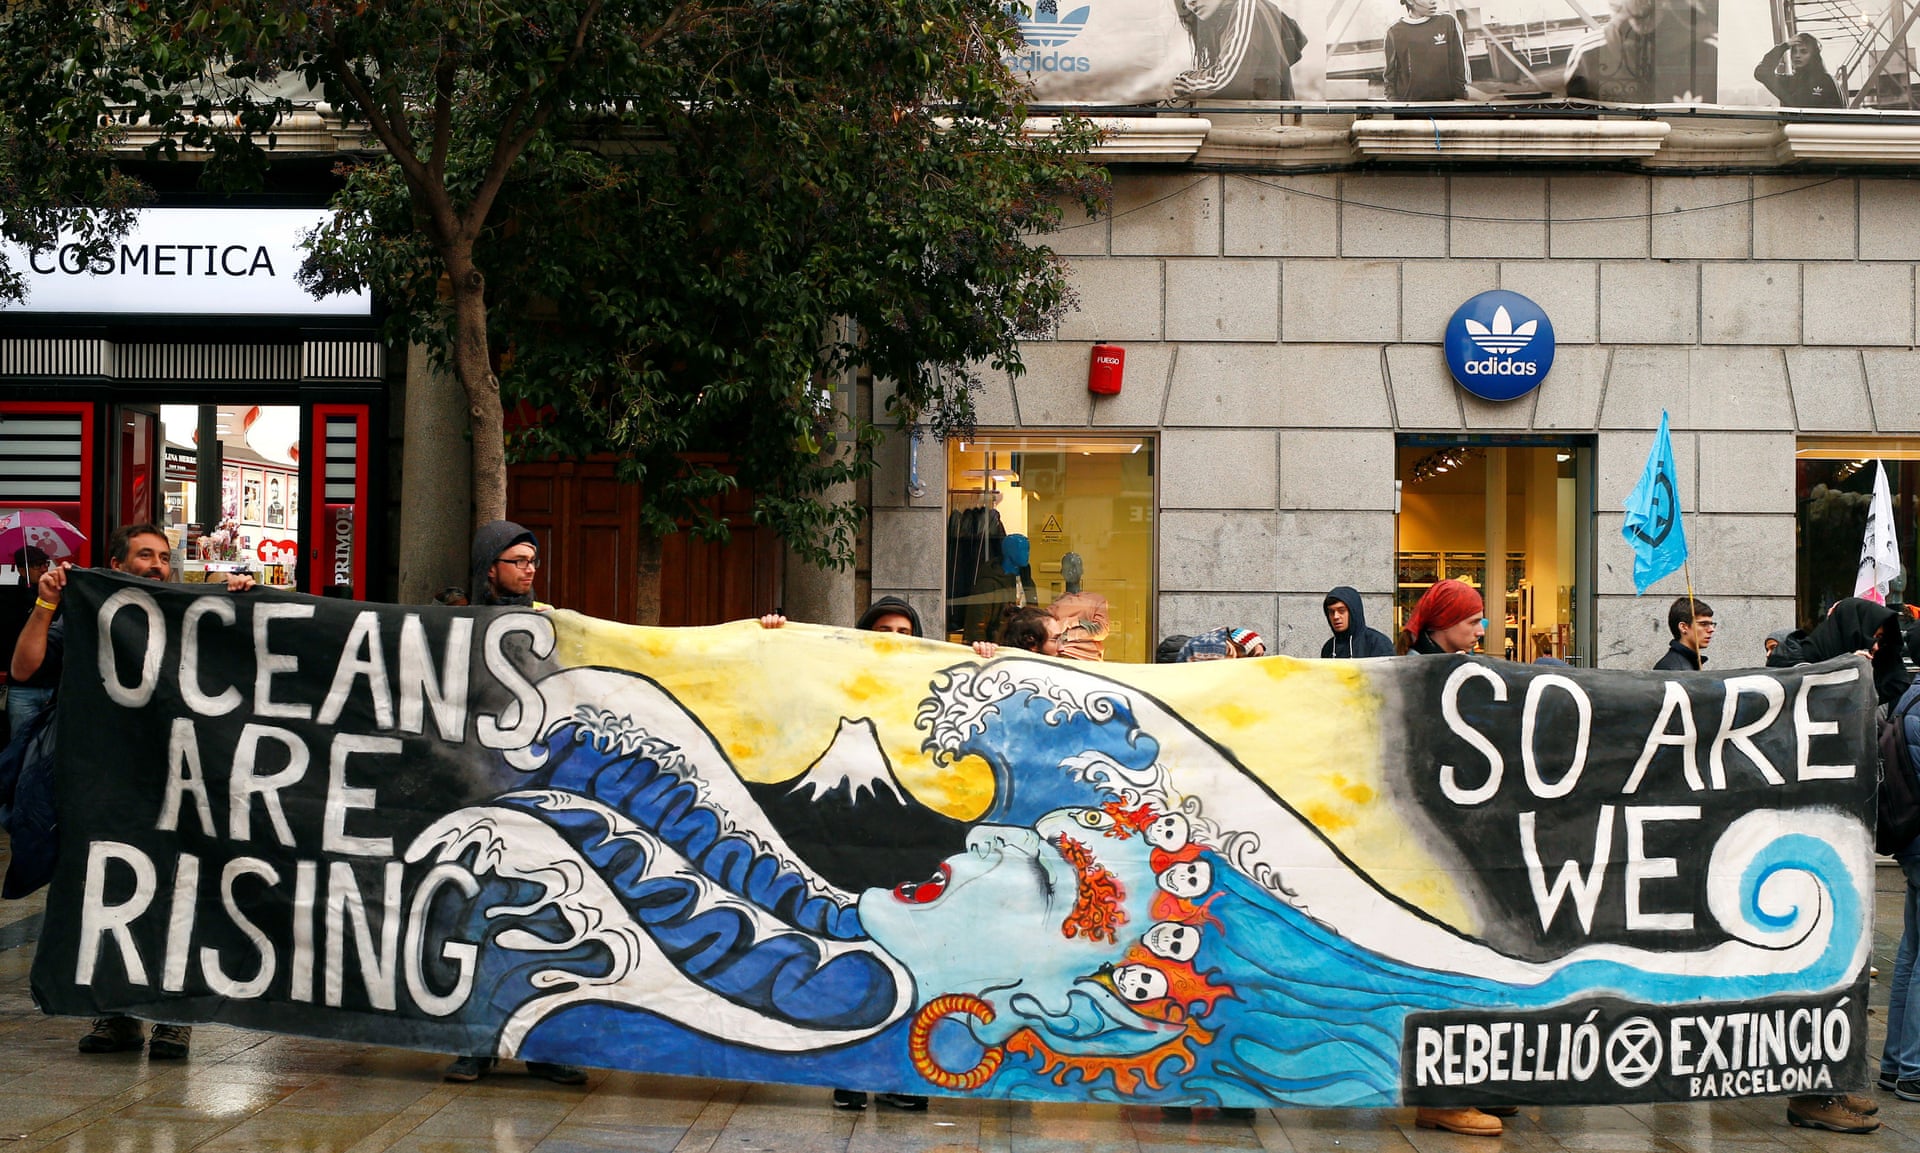 Extinction Rebellion protesters in Madrid during the COP25 climate summit in December 2019 hold a banner that reads, “Oceans are rising. So are we.” Photo: Javier Barbancho / Reuters